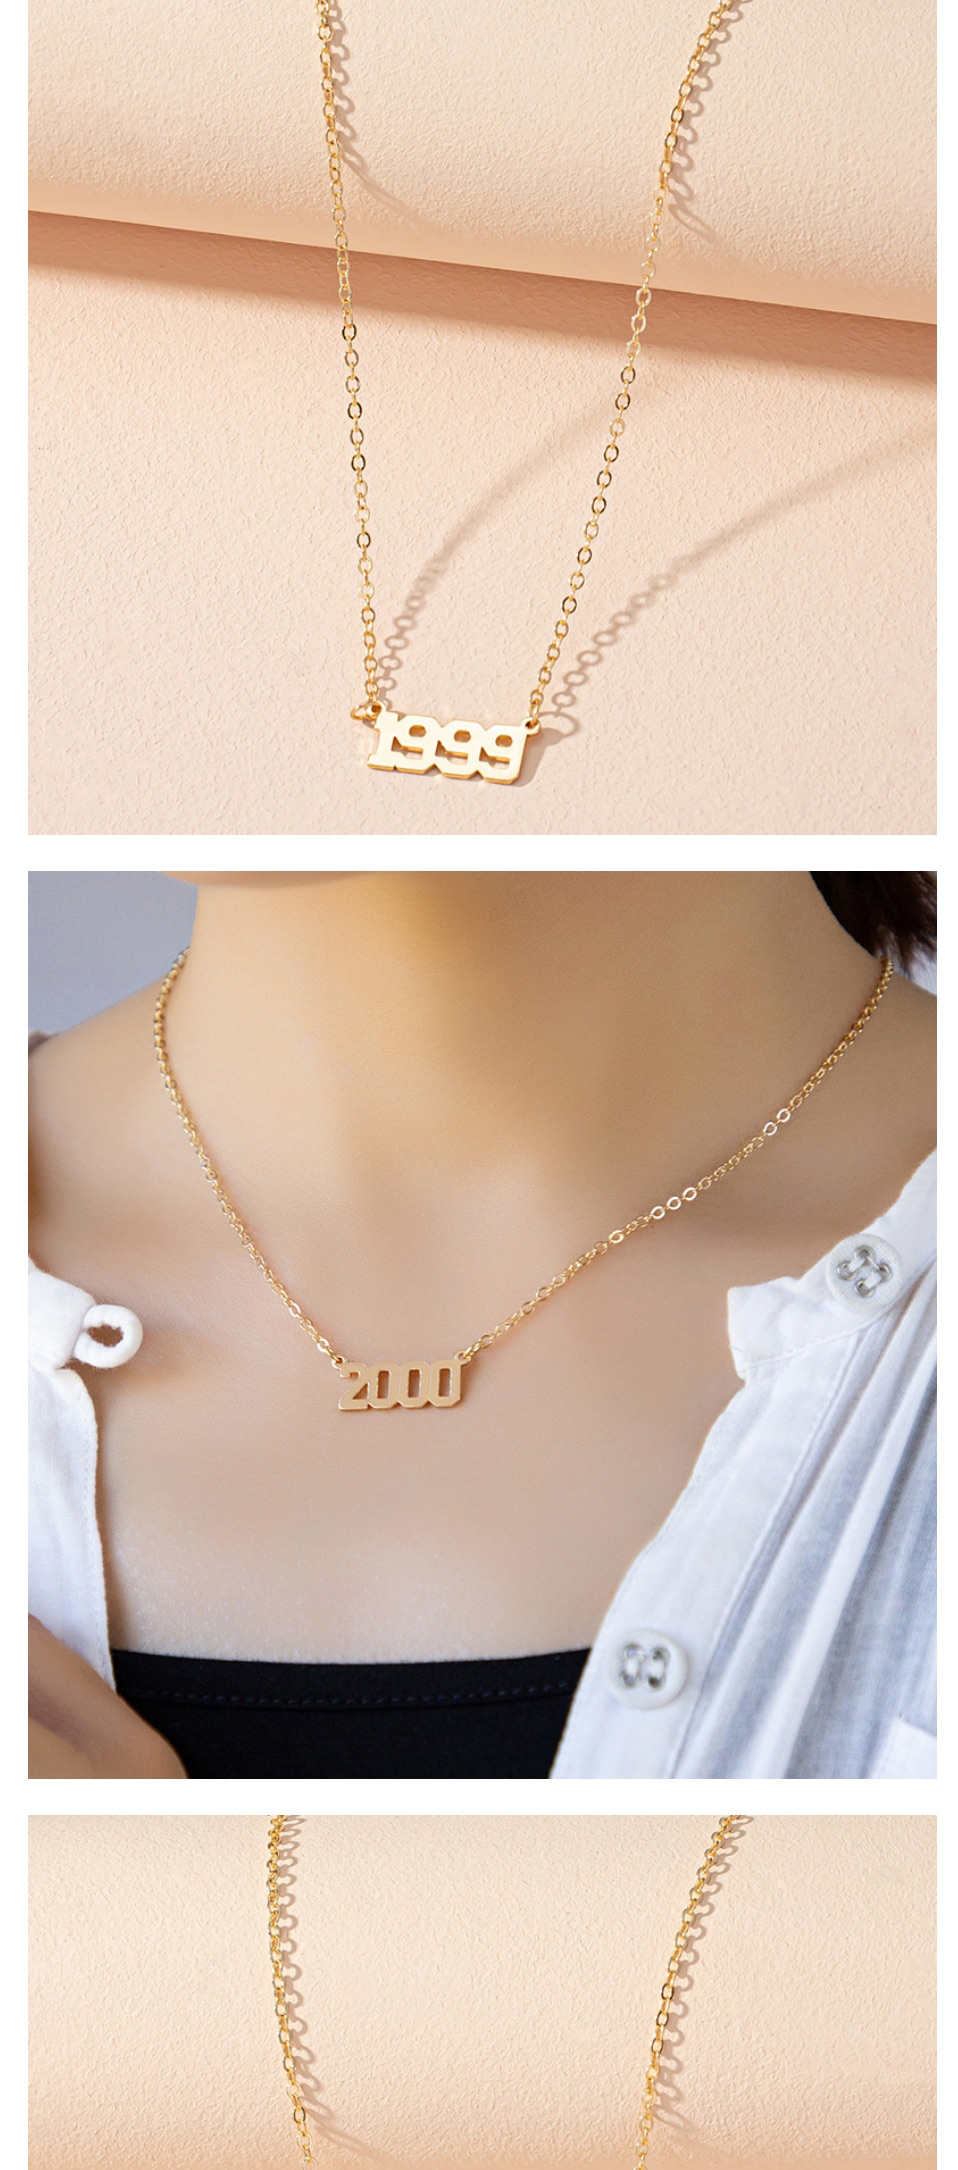 Fashion 2001 Alloy Number Necklace,Pendants